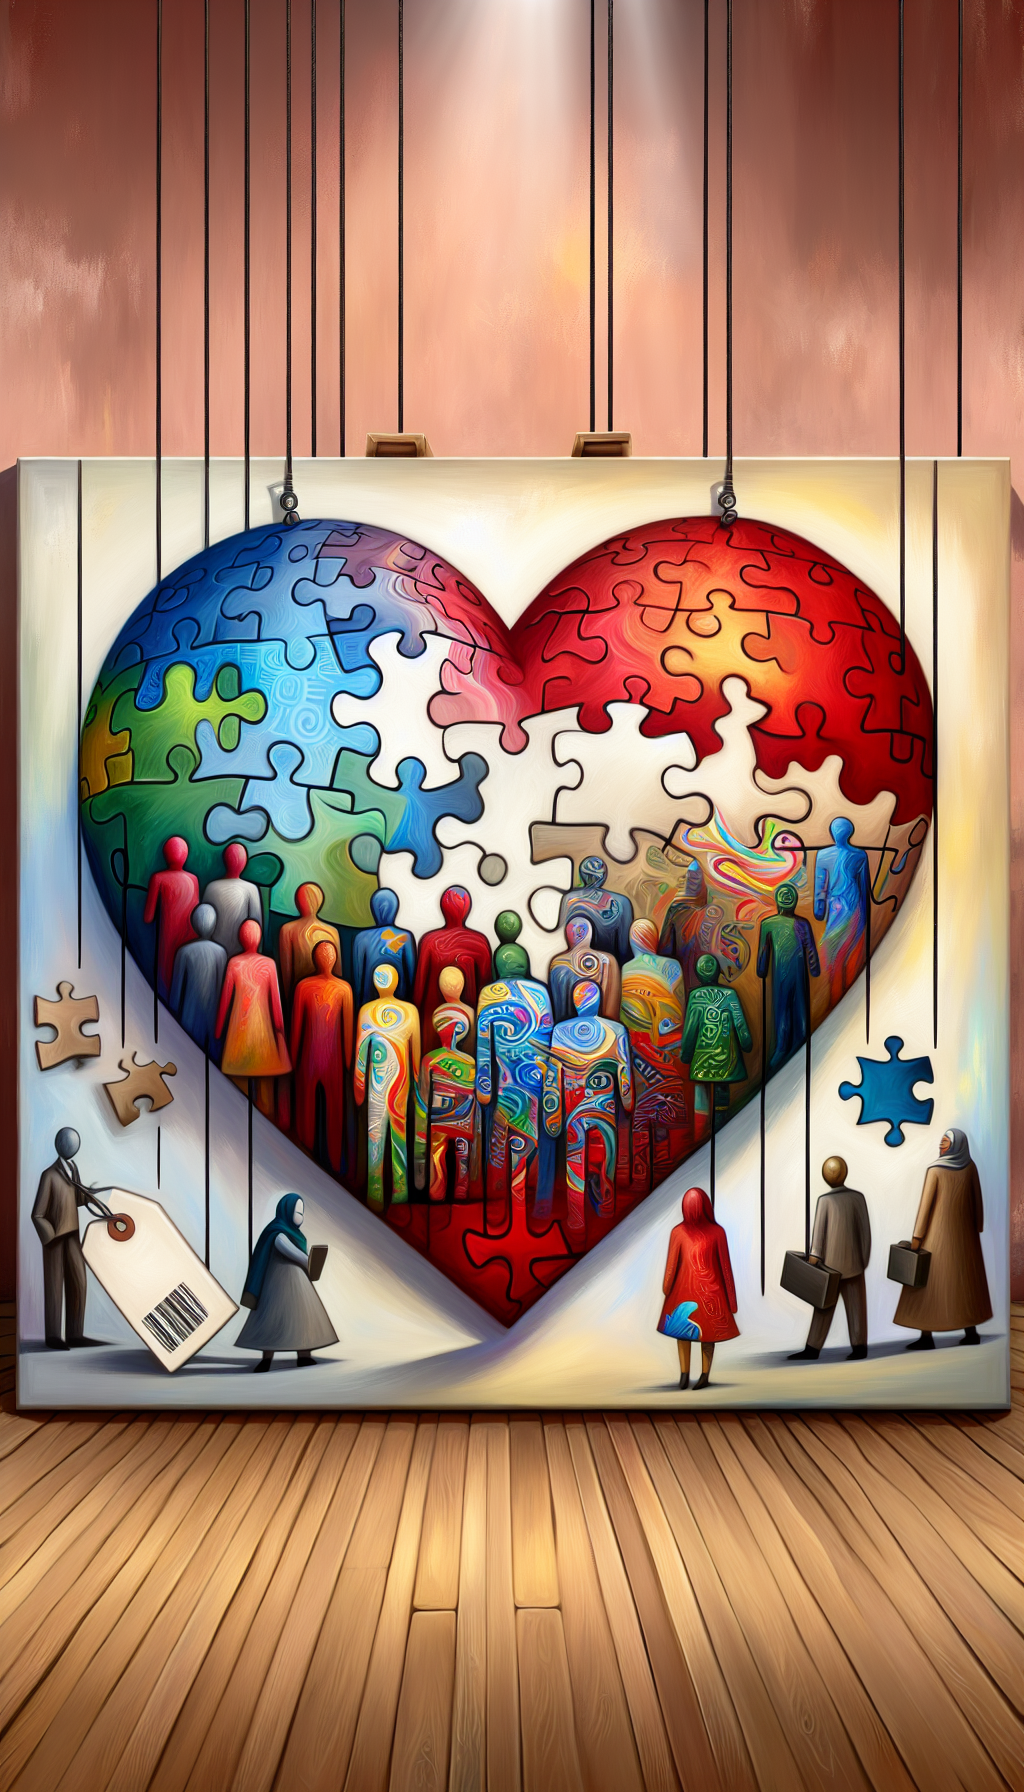 The illustration depicts a heart-shaped canvas where diverse figures hold sections of a puzzle, each piece adorned with different emotions and social scenes. The incomplete puzzle floats above a price tag, dissolving into abstract lines, signifying art's value transcending monetary worth, capturing the essence of its emotional and social impact in a mosaic of human experience.